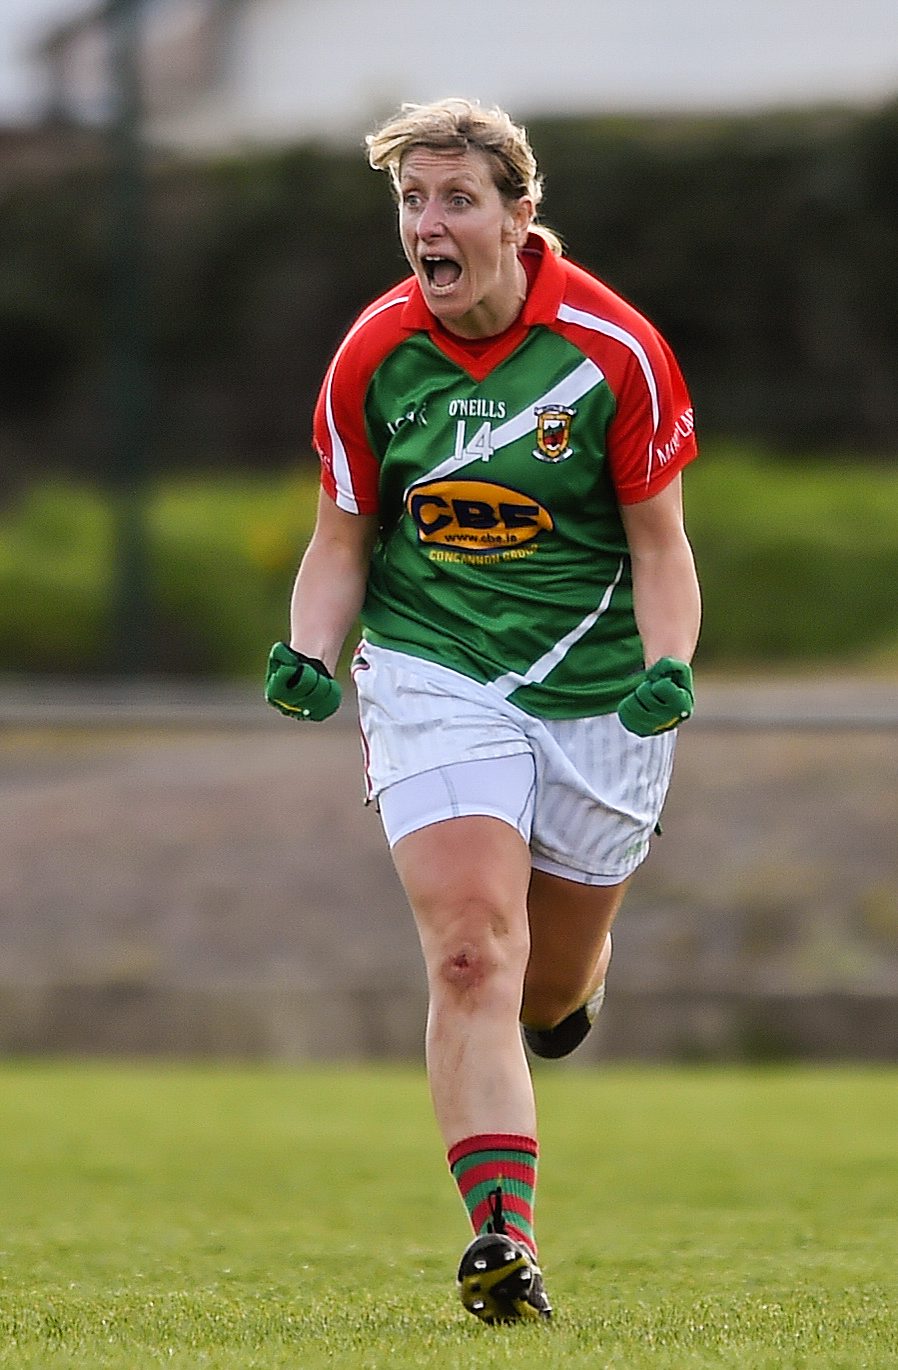 23 April 2016; Mayo's Cora Staunton celebrates scoring her side's winning point. Lidl Ladies Football National League, Division 1, semi-final, Mayo v Kerry. St Brendan's Park, Birr, Co. Offaly. Picture credit: Ramsey Cardy / SPORTSFILE  *** NO REPRODUCTION FEE ***